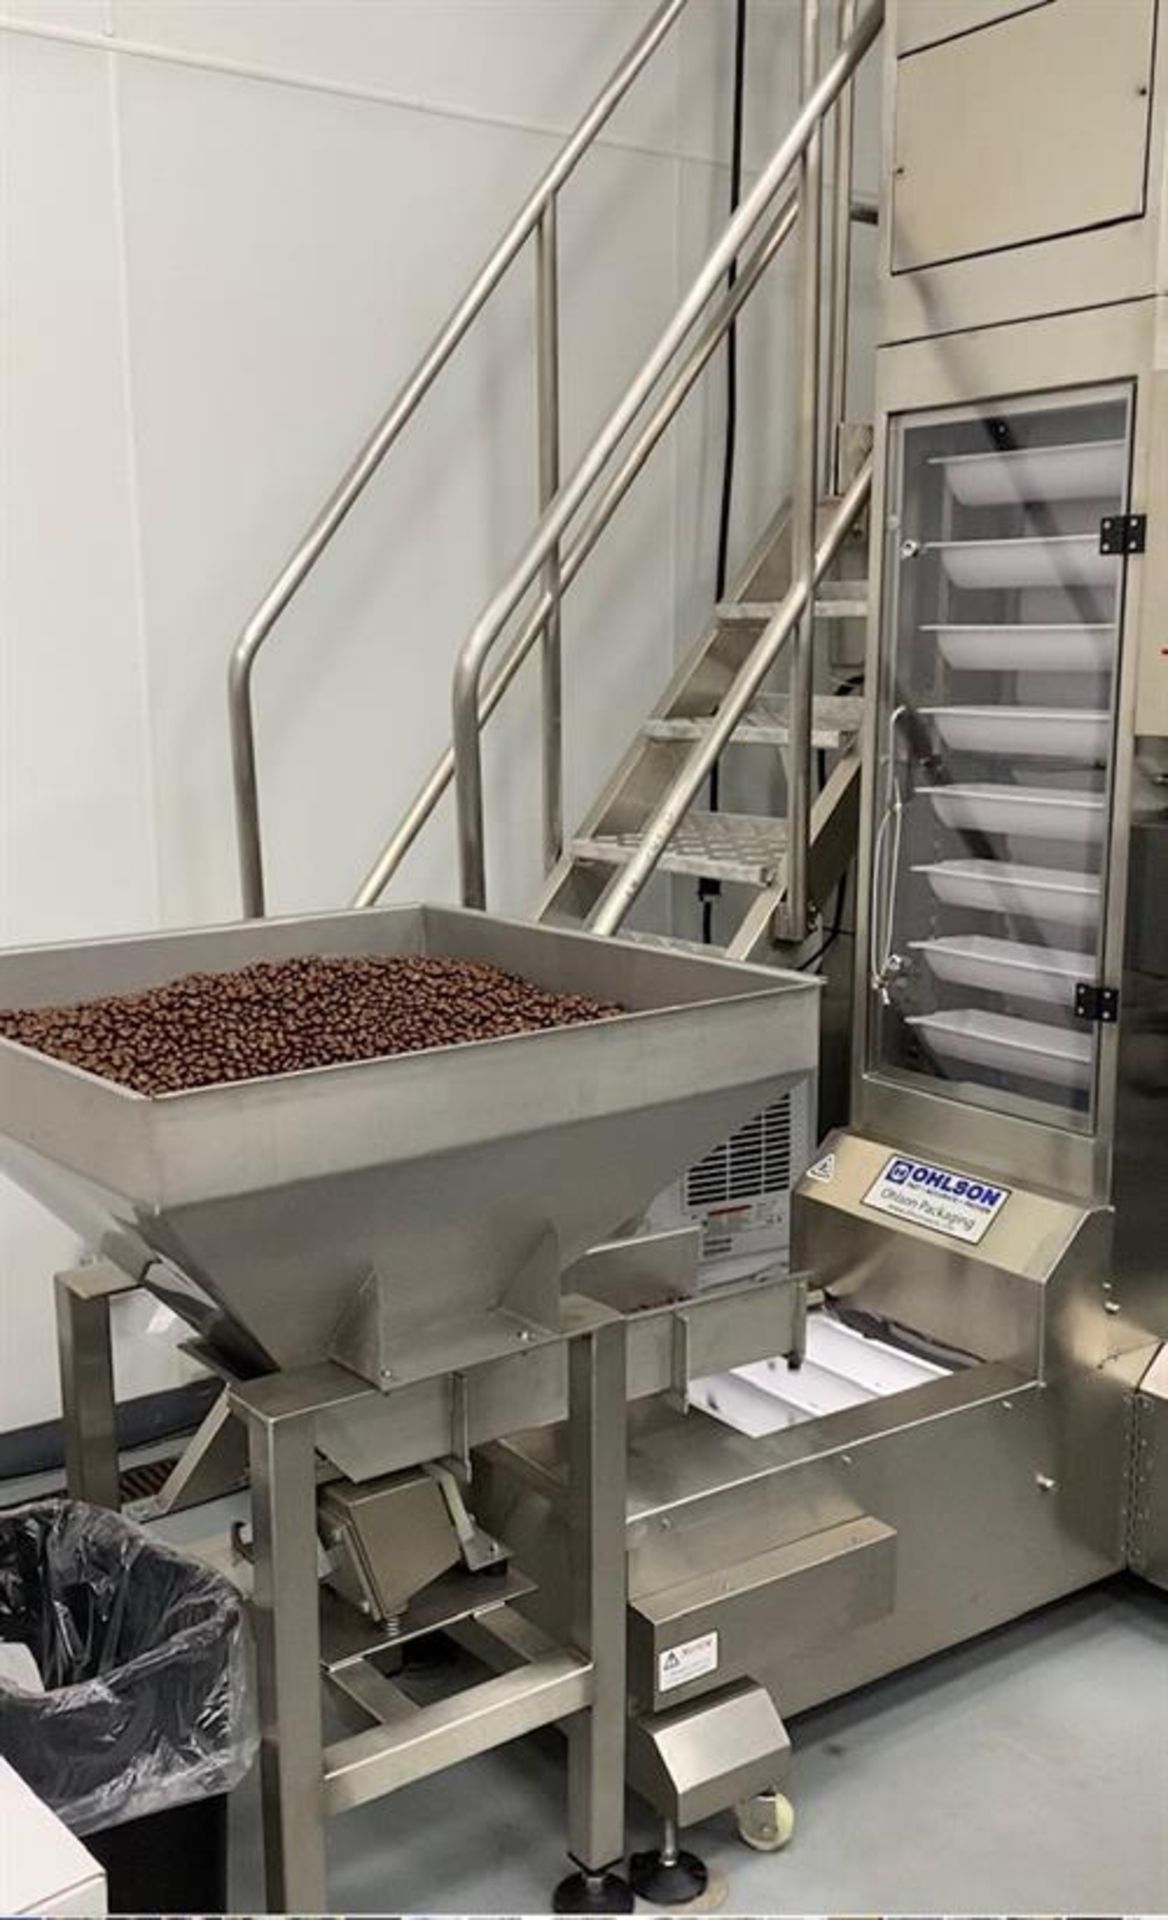 Ohlson Bagger with 14-head Weigher - Built new in 2019 - Image 3 of 5